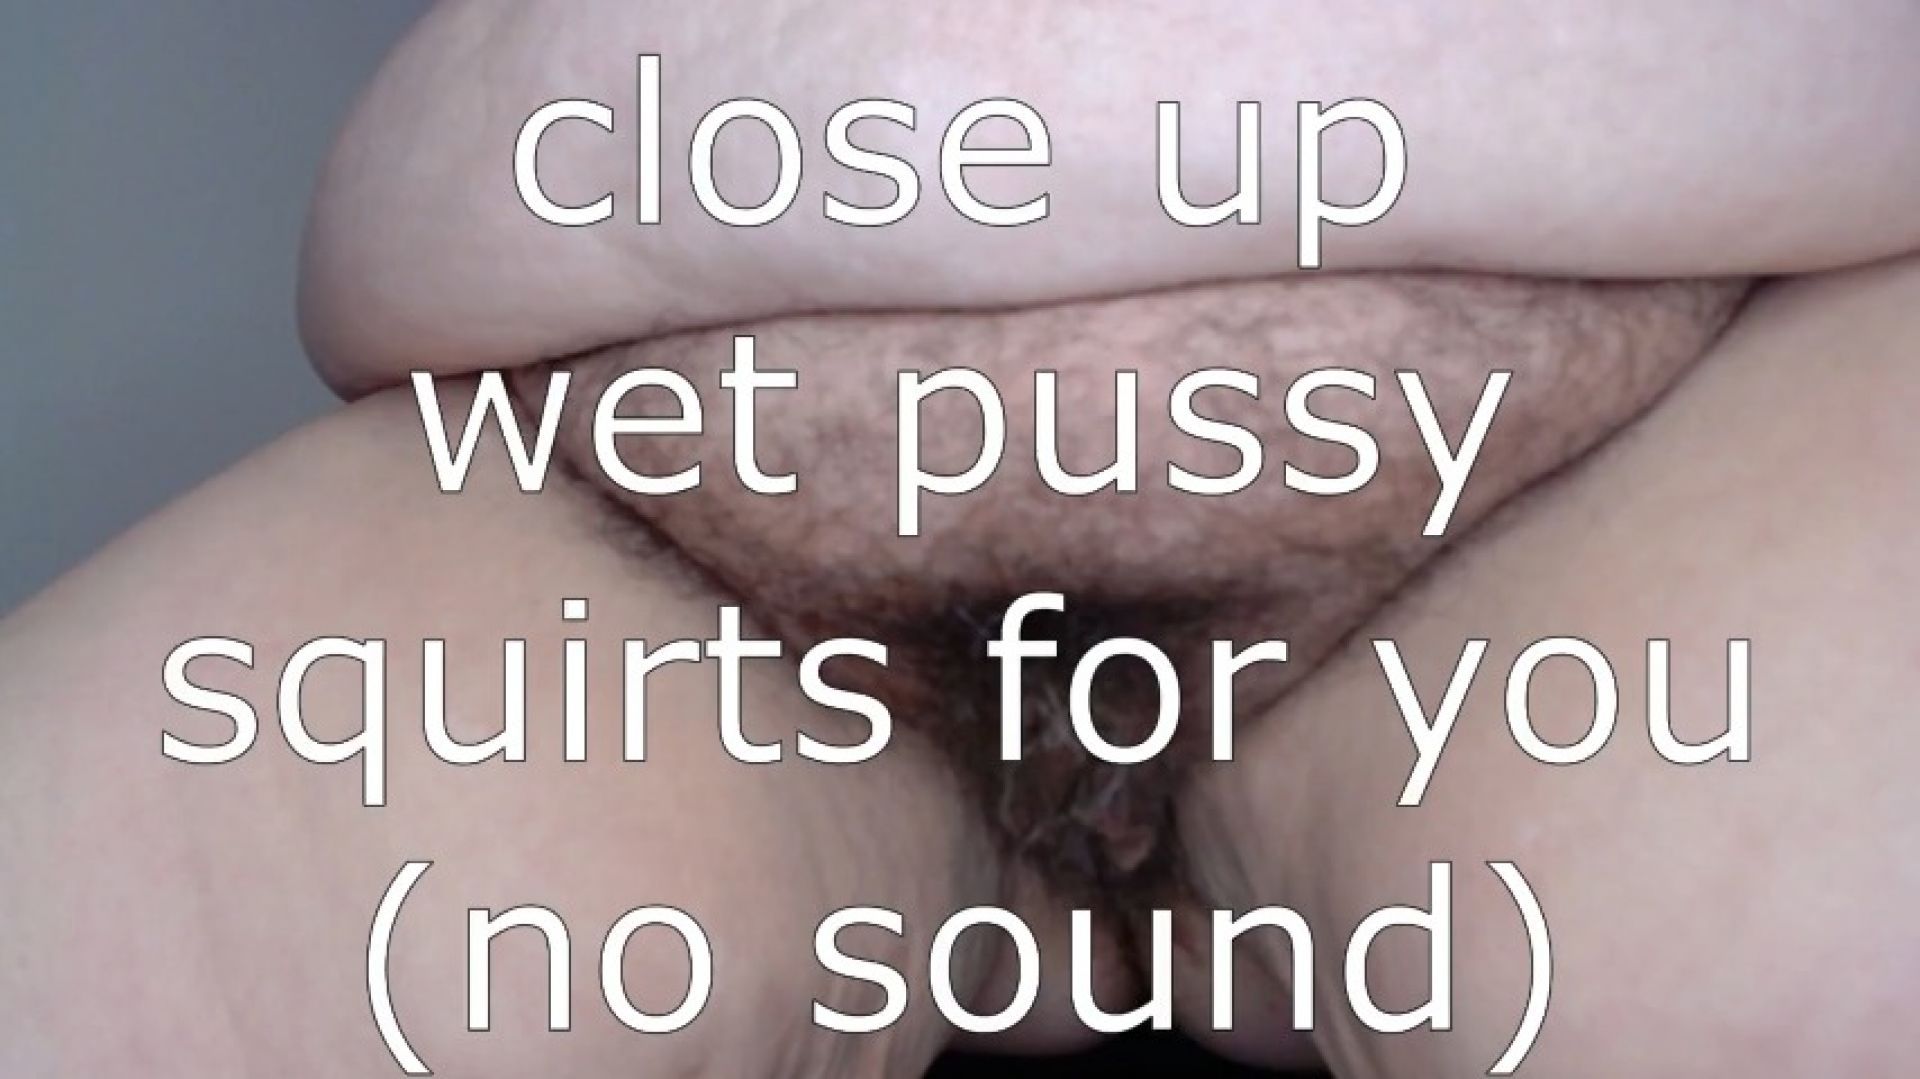 close up wet pussy squirts for you! no sound